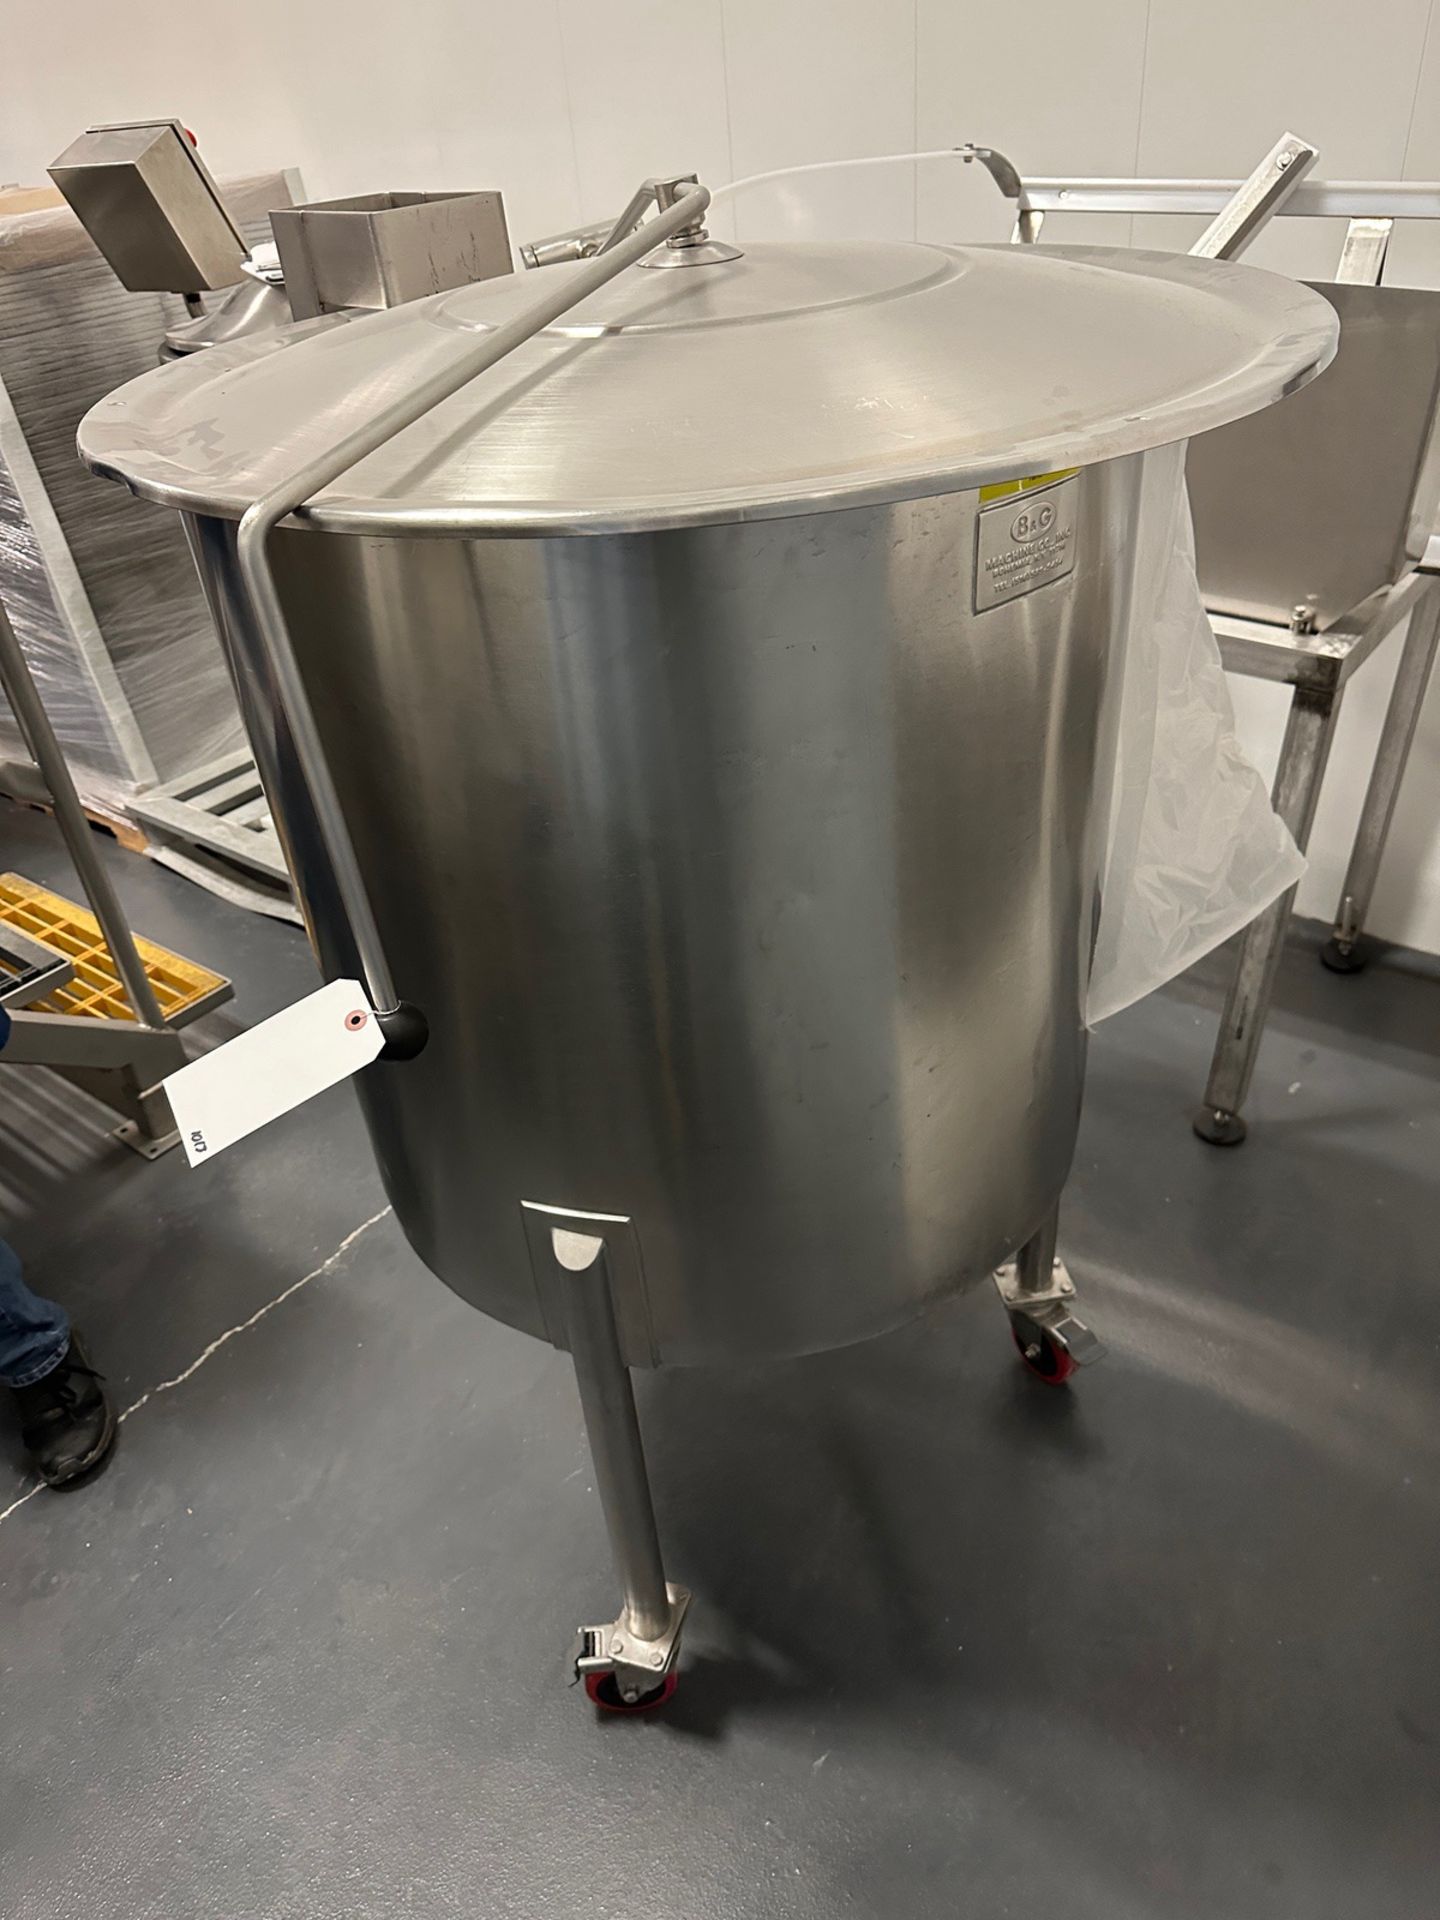 B&G Stainless Steel Utility Tank on Casters (Approx. 32"" Diameter and 54"" O.H.) - Image 2 of 4